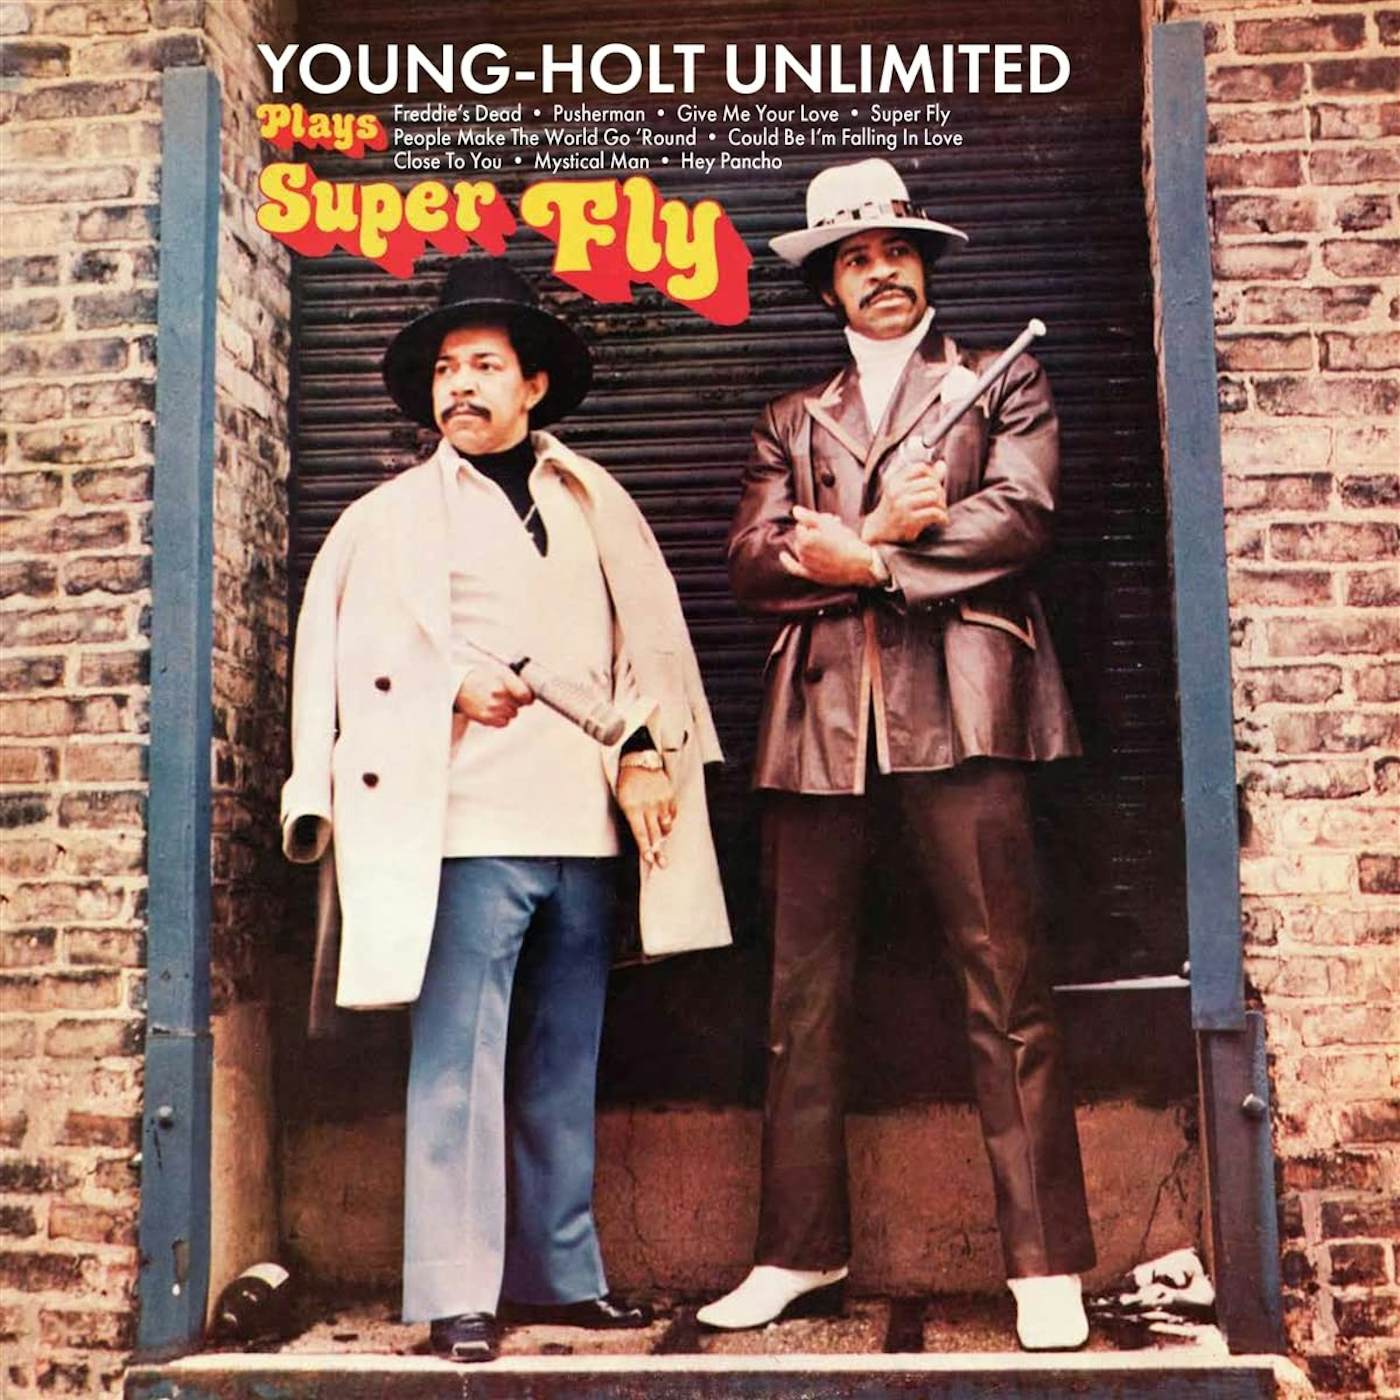 Young-Holt Unlimited Plays Super Fly CD